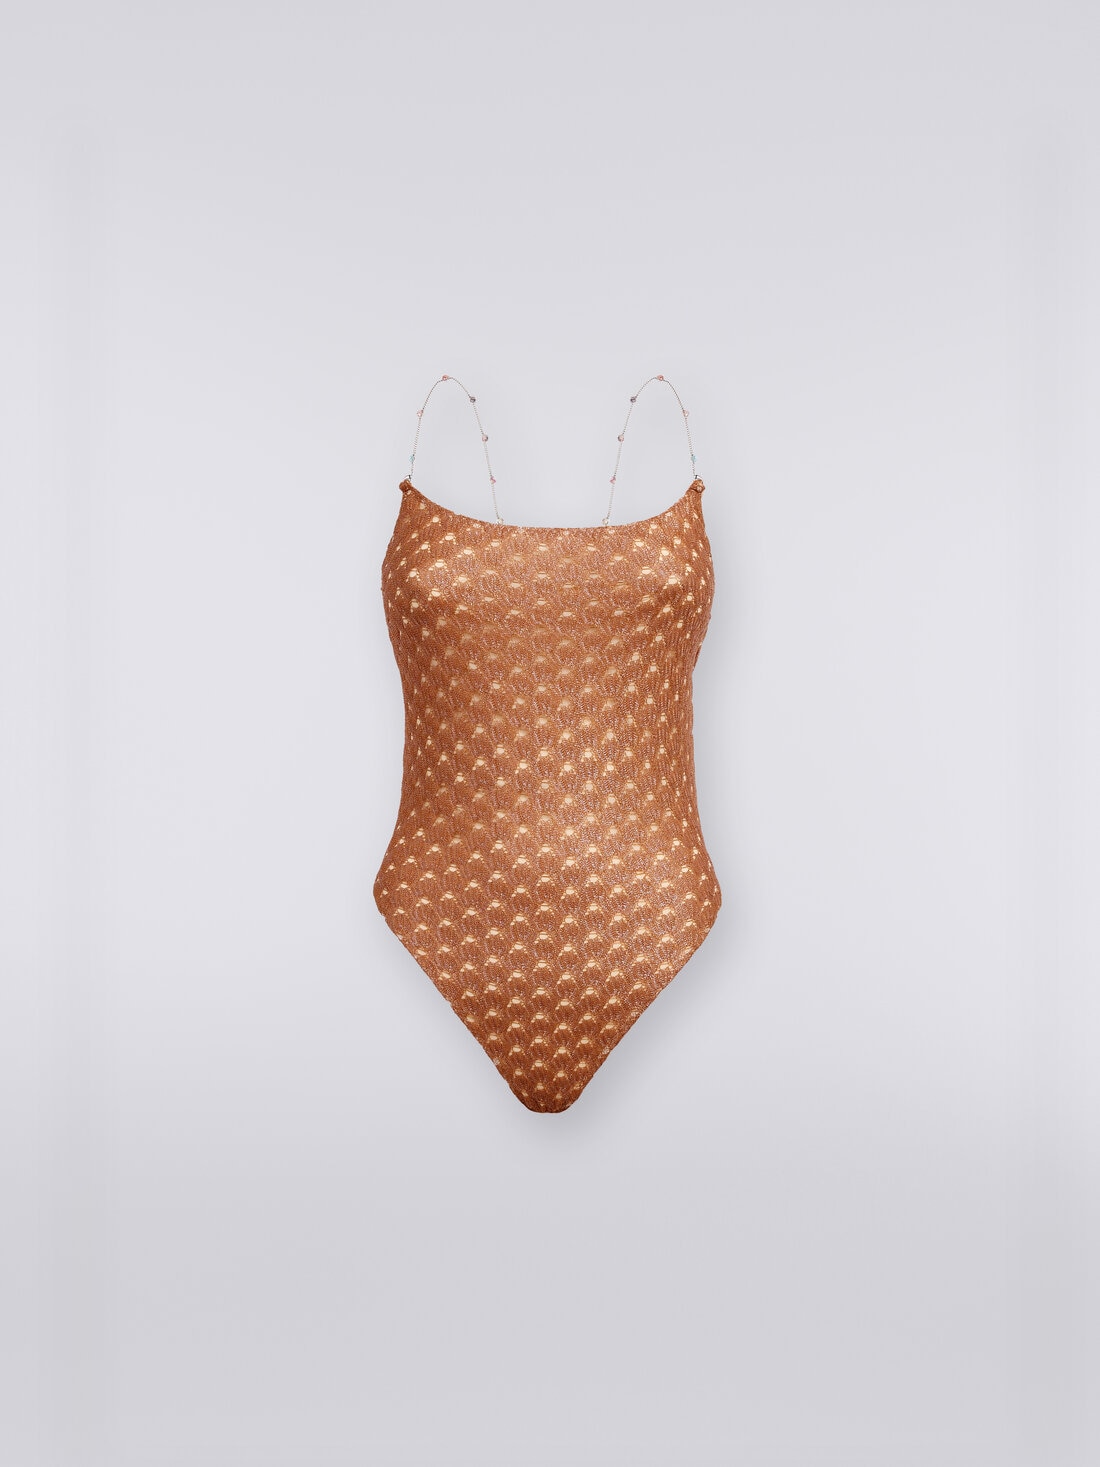 Lace-effect one-piece swimming costume with chain and gem straps, Brown Lamé - MS24SP0ABR00TC71052 - 0